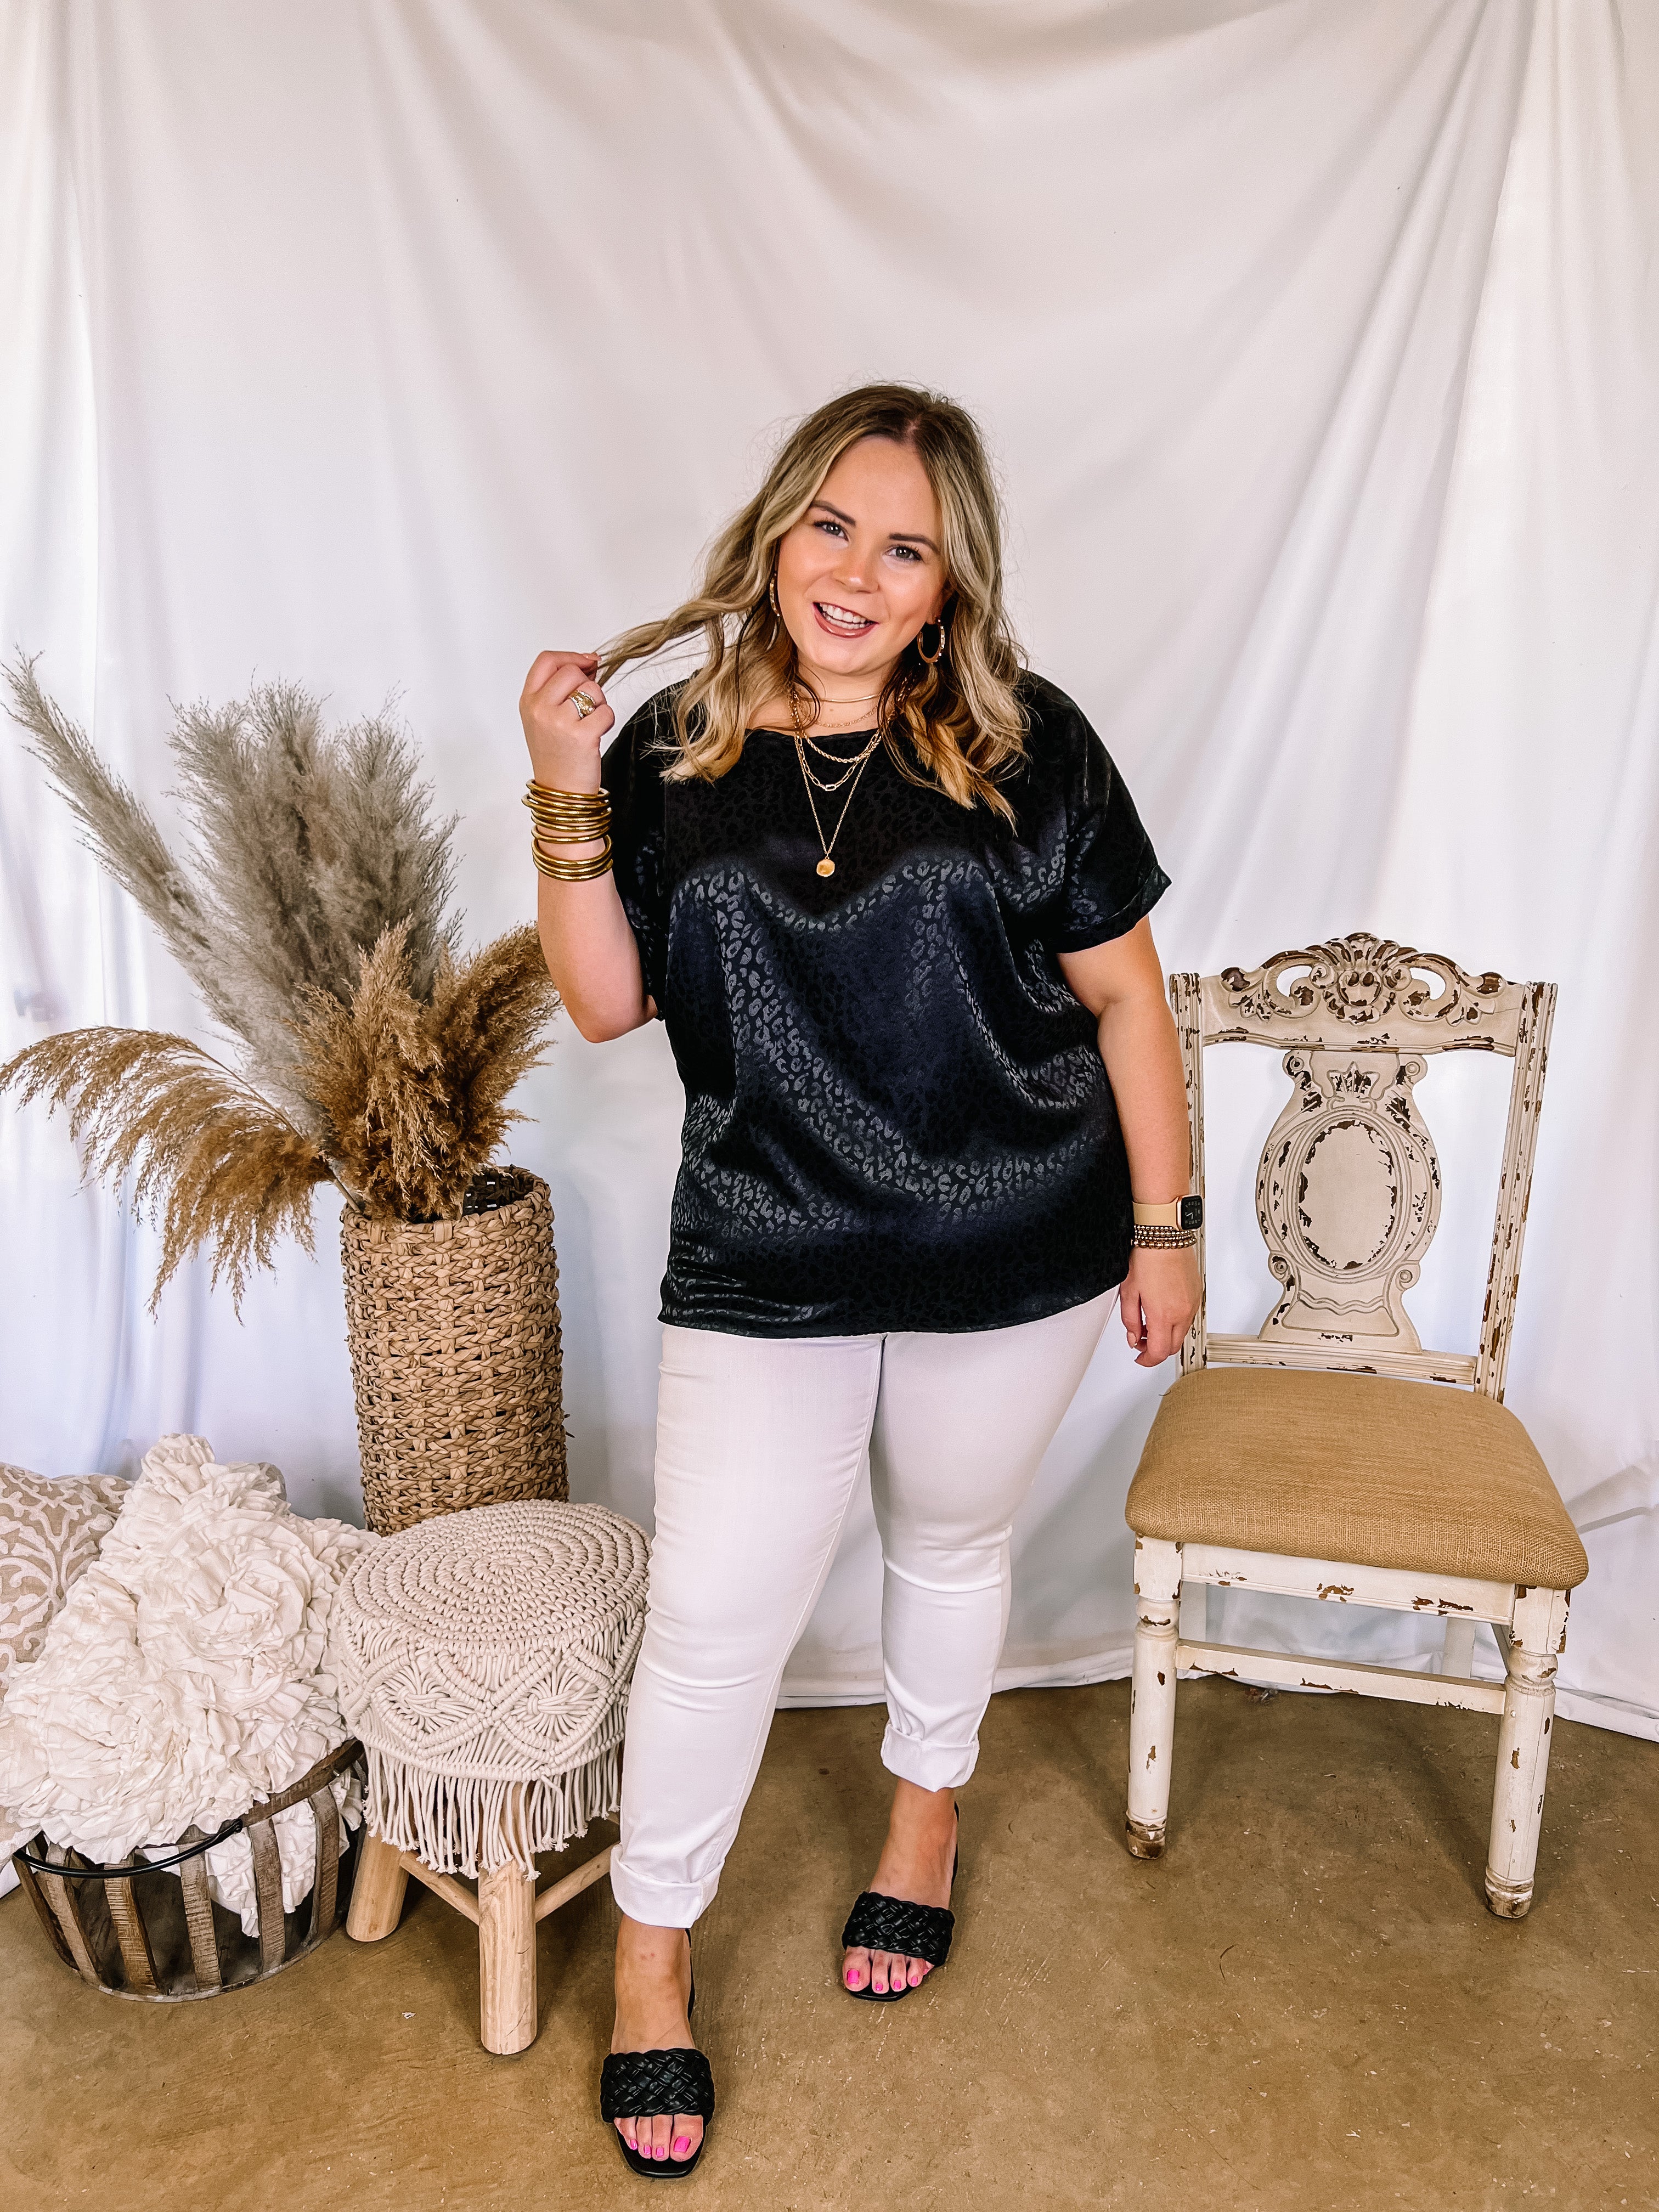 Complete Awe Short Sleeve Satin Leopard Print Top in Black - Giddy Up Glamour Boutique